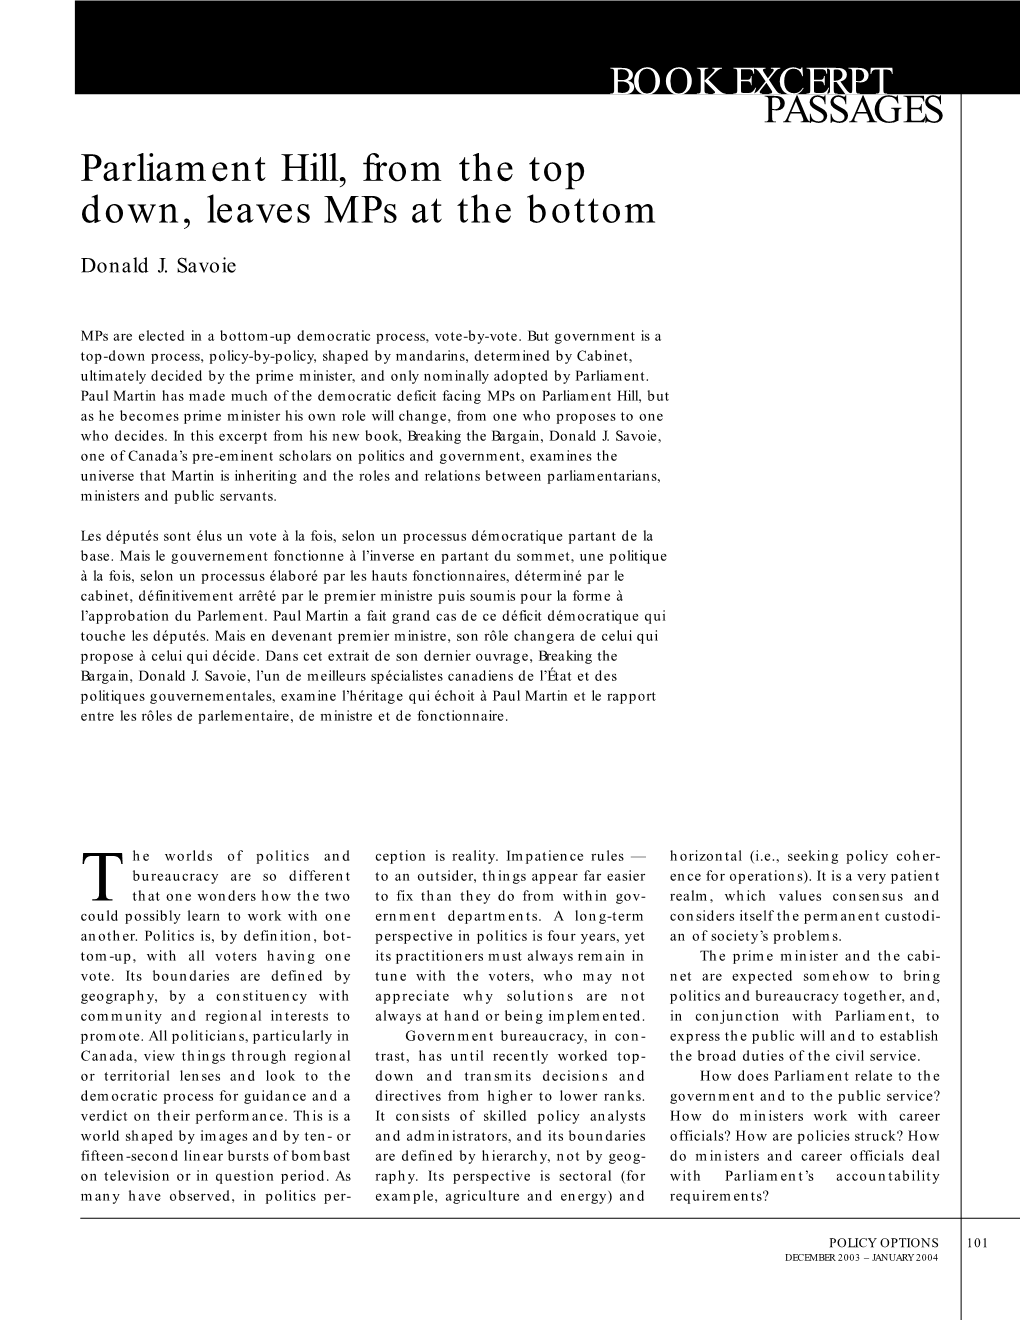 Parliament Hill, from the Top Down, Leaves Mps at the Bottom BOOK EXCERPT of the Government Caucus, Where They Going to Be “It’S Not Worth the Paper Tive